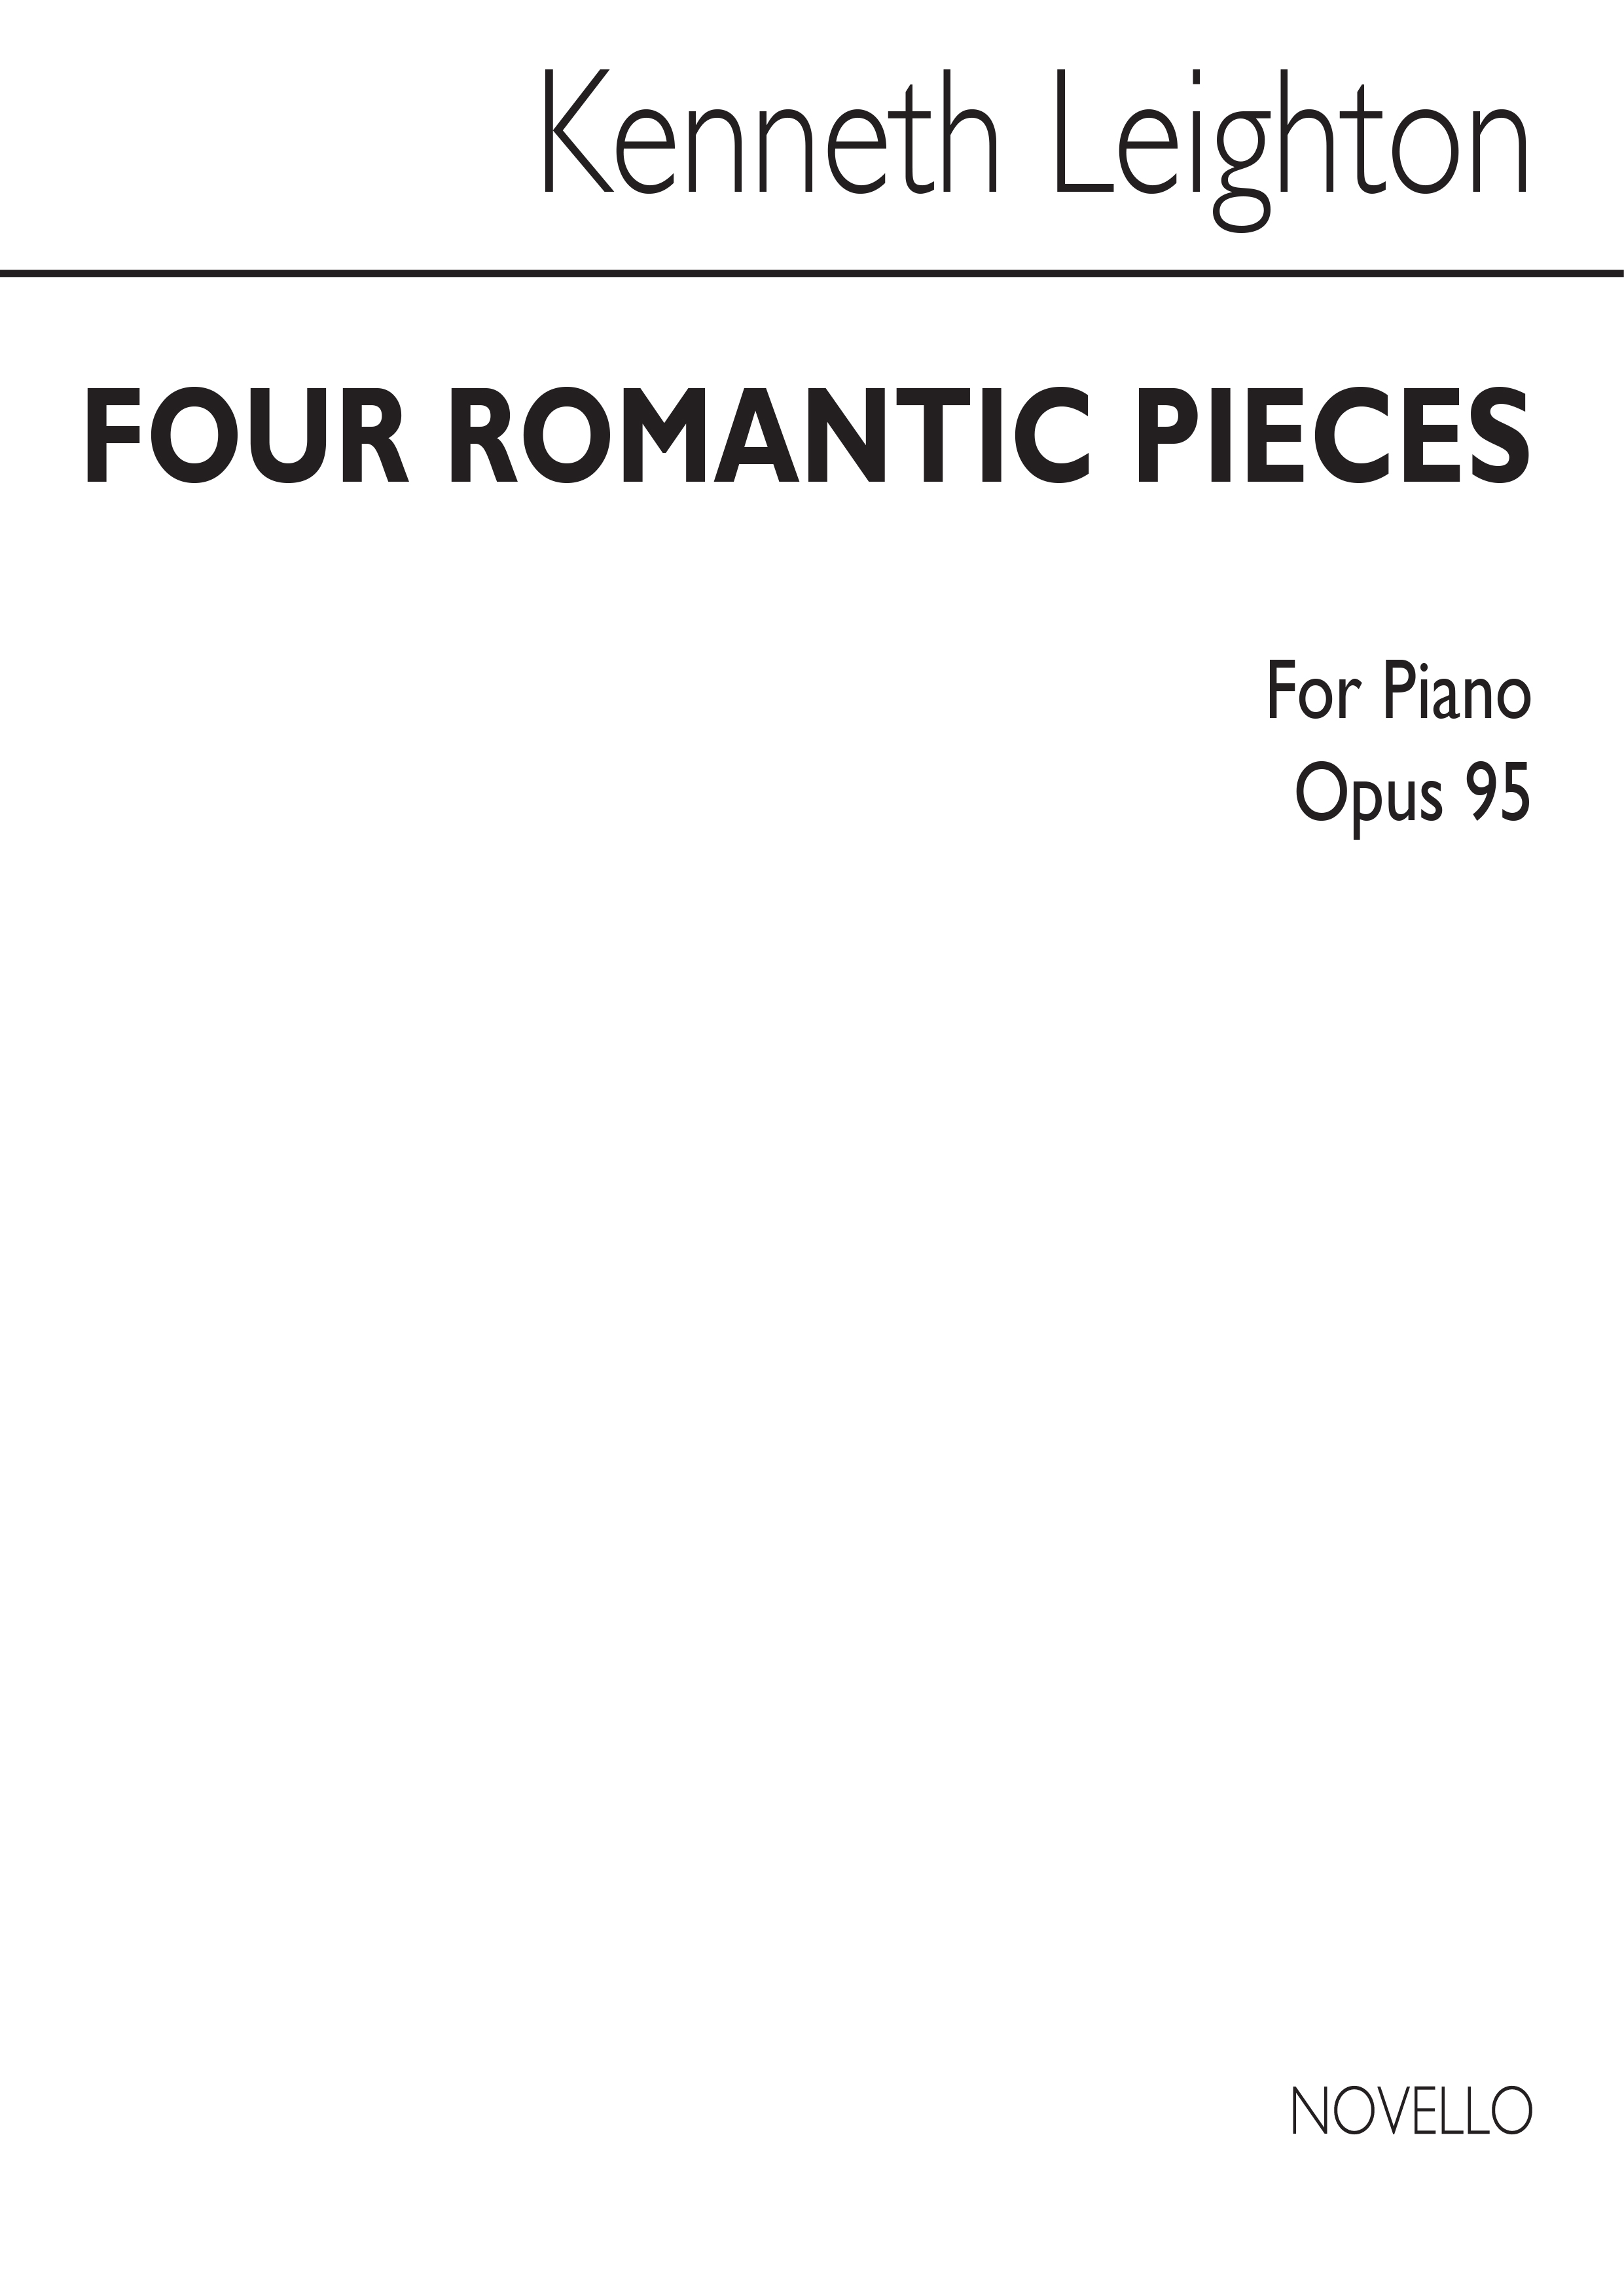 Kenneth Leighton: Four Romantic Pieces For Piano Op.95